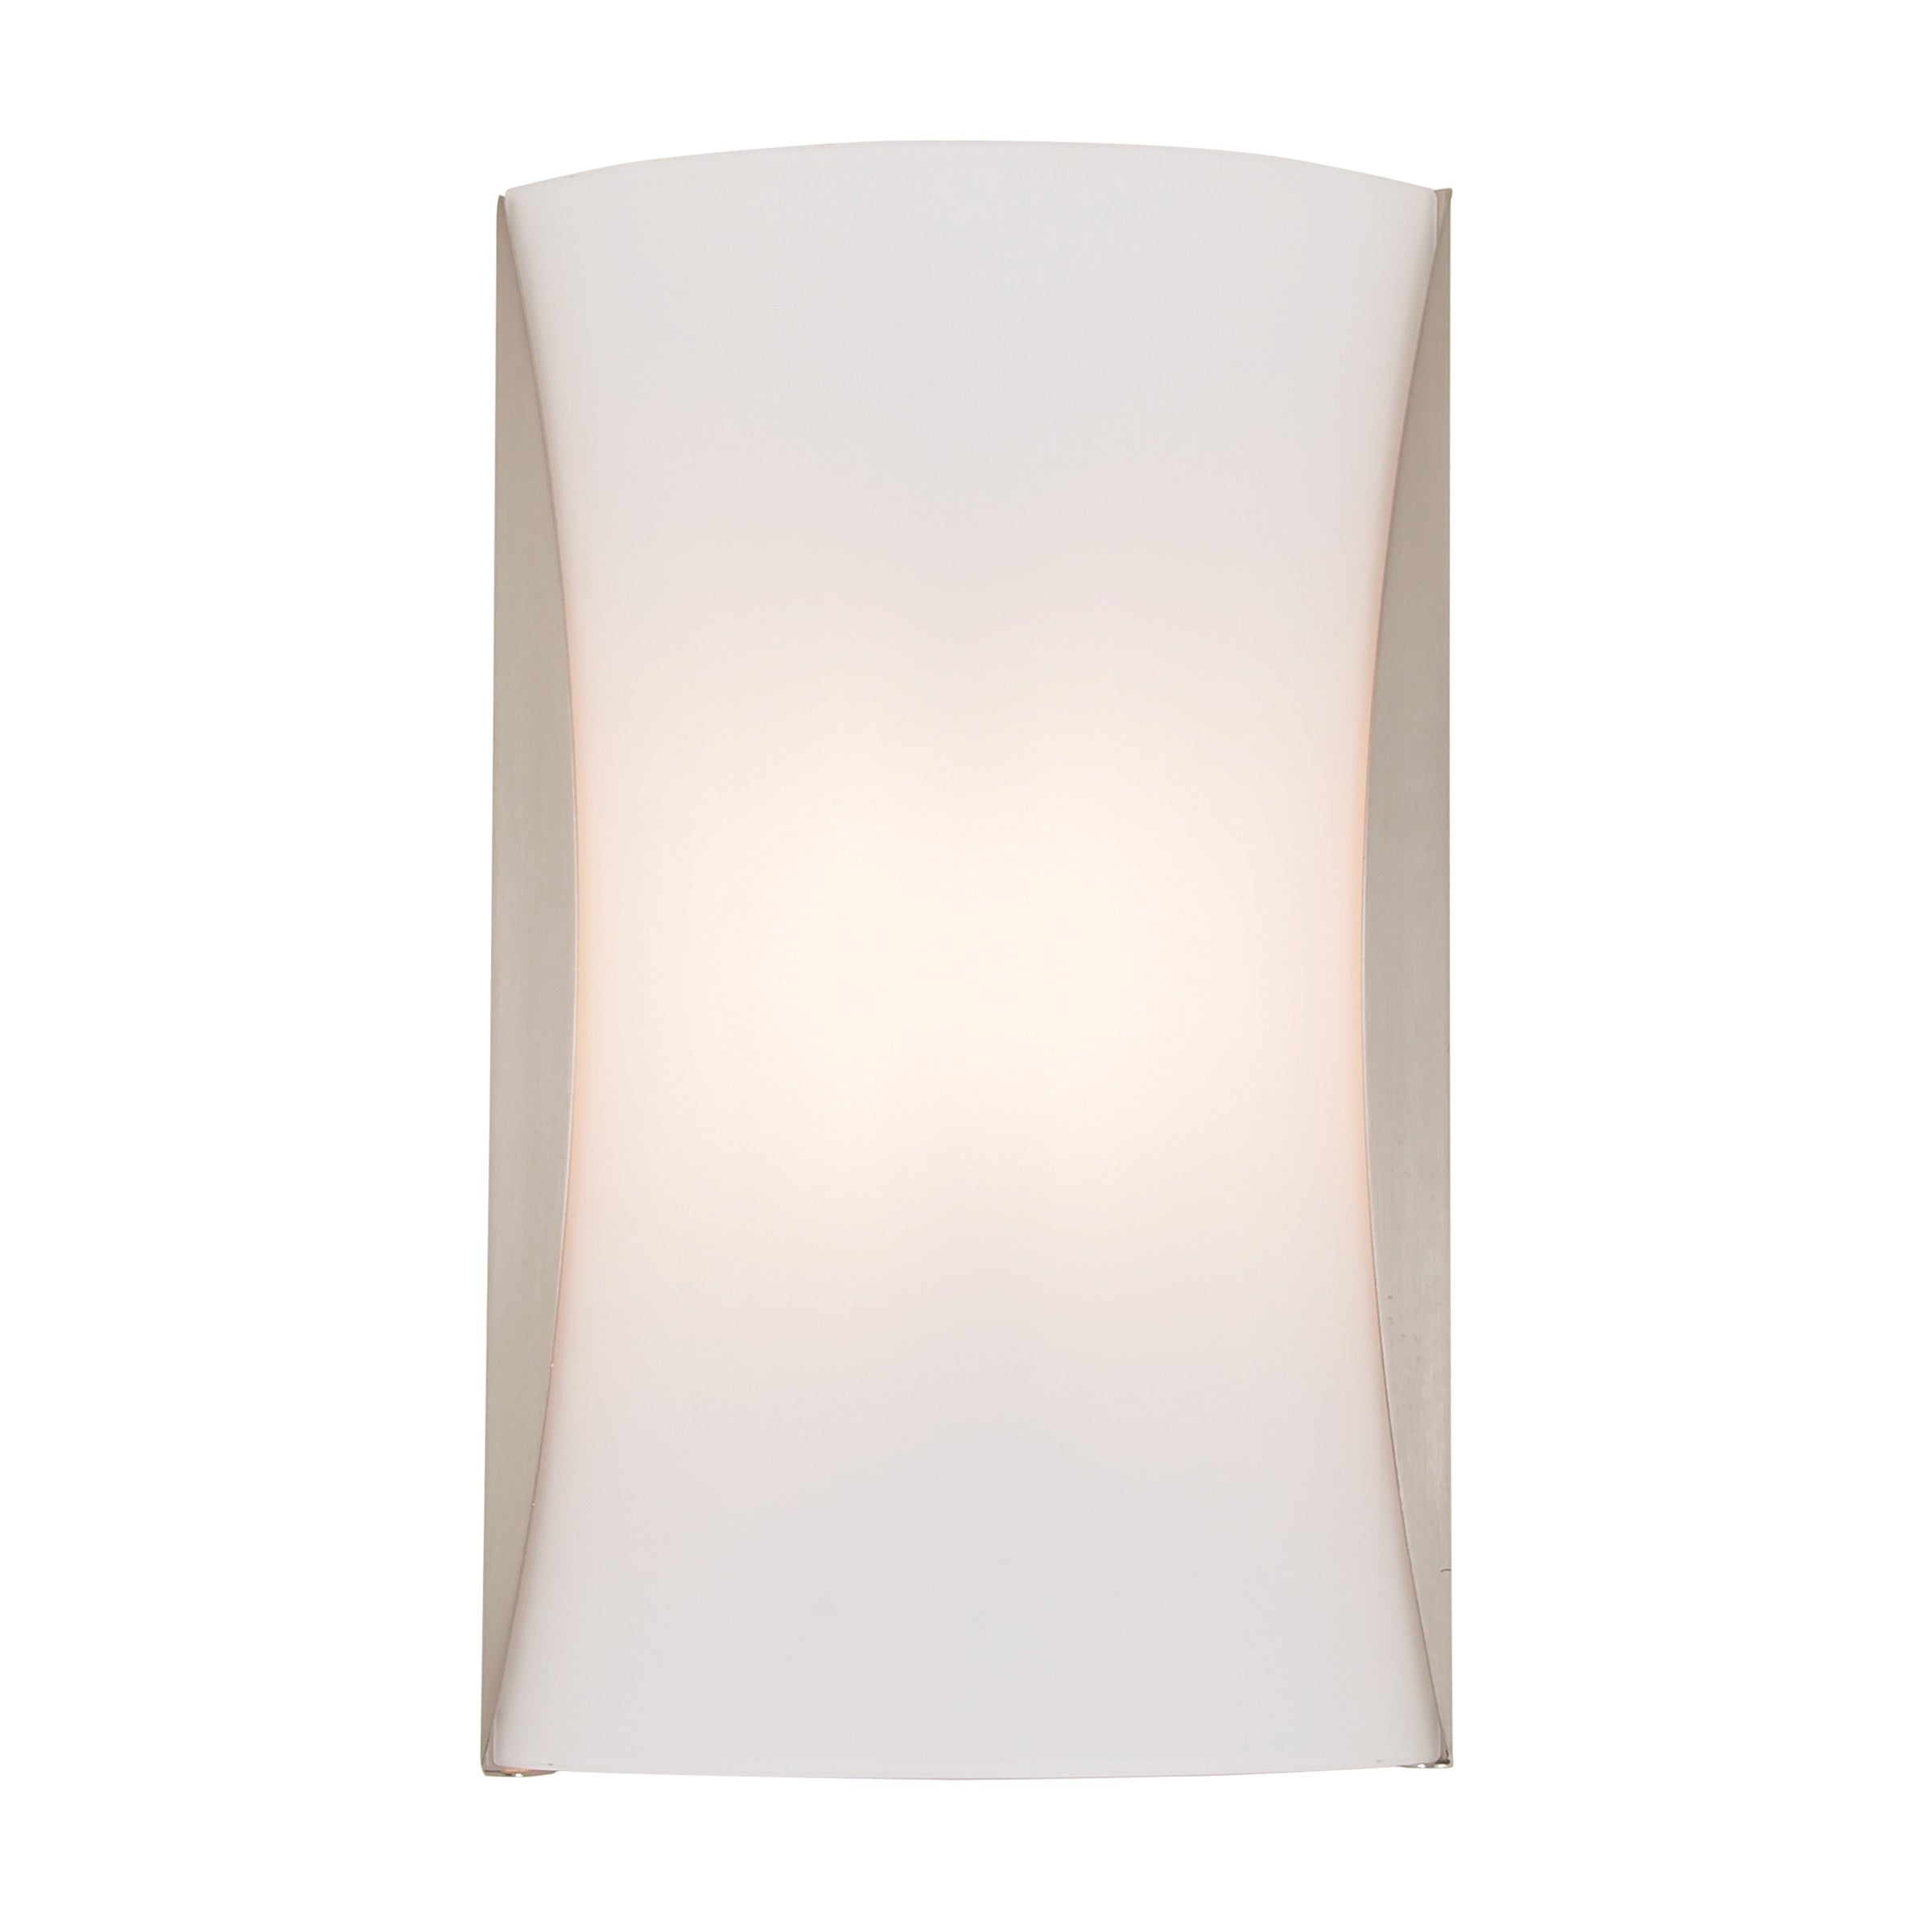 Kingsway AC LED Sconce Satin Nickel with Half Opal Glass